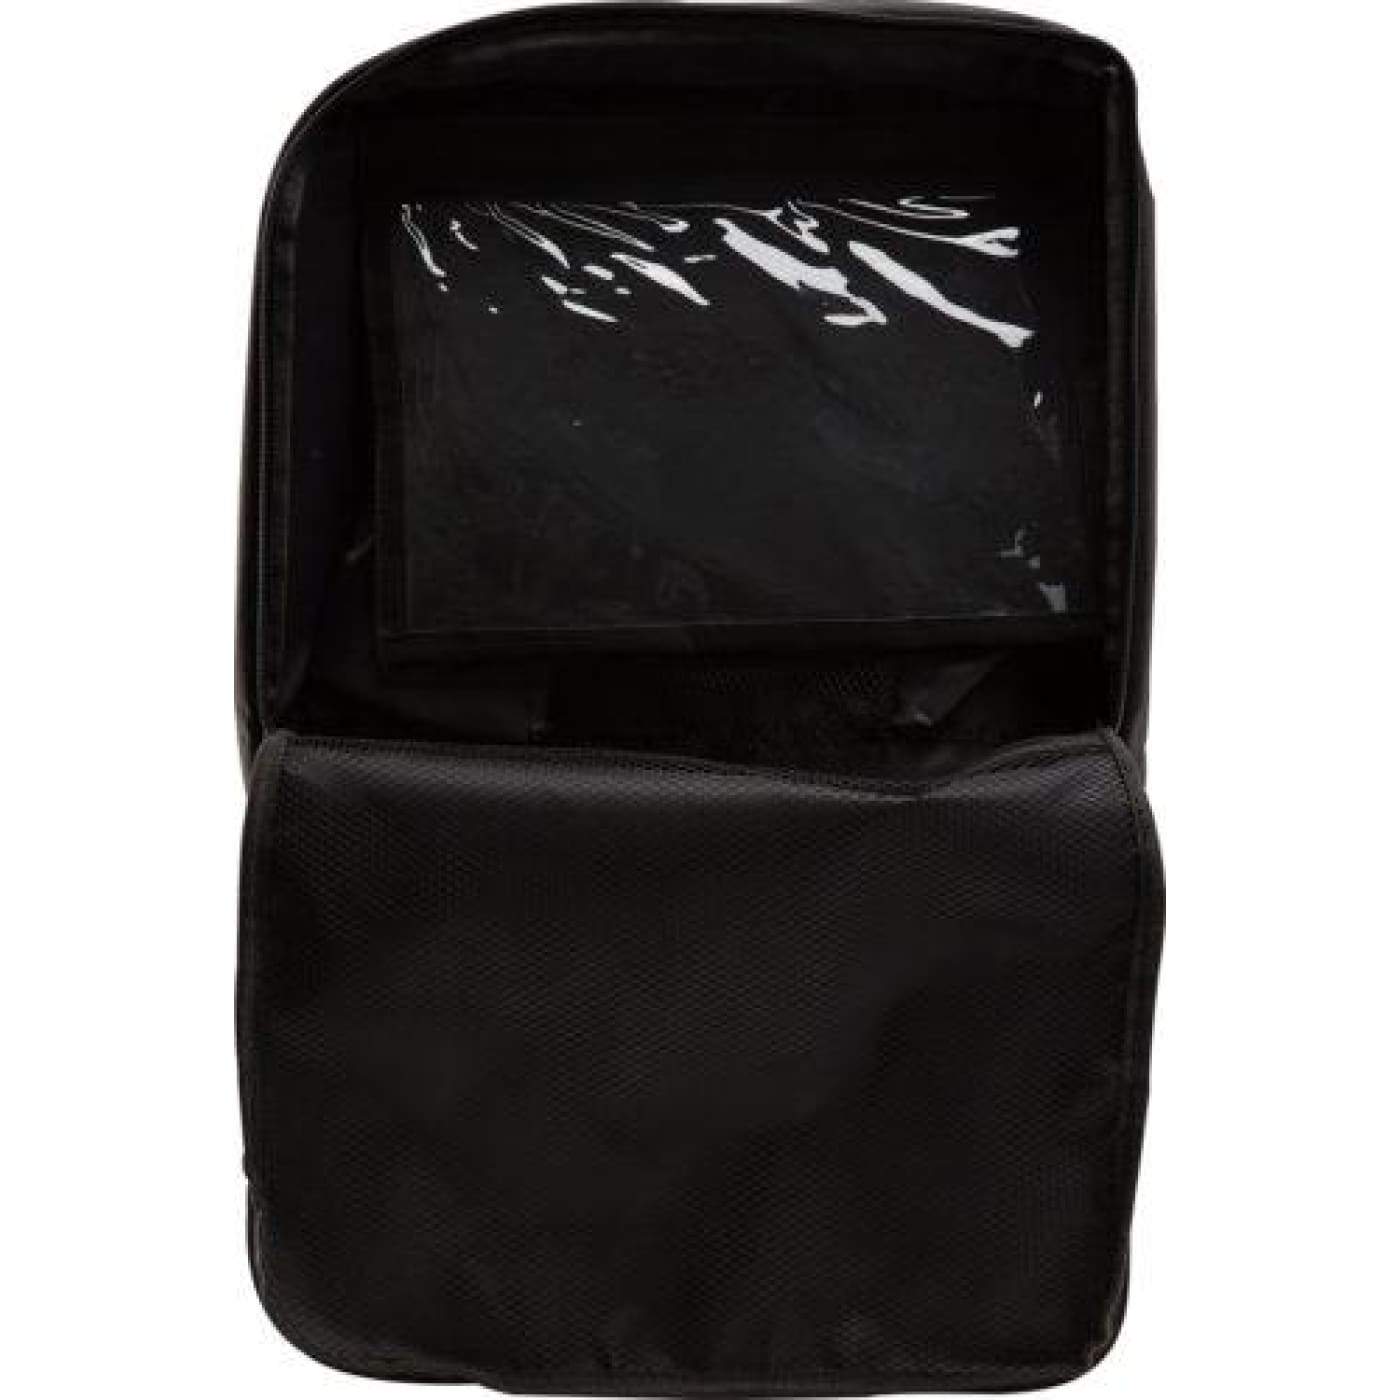 InfaSecure Zip Up Organiser with Tablet Holder - CAR SEATS - SEAT PROTECTORS/MIRRORS/STORAGE